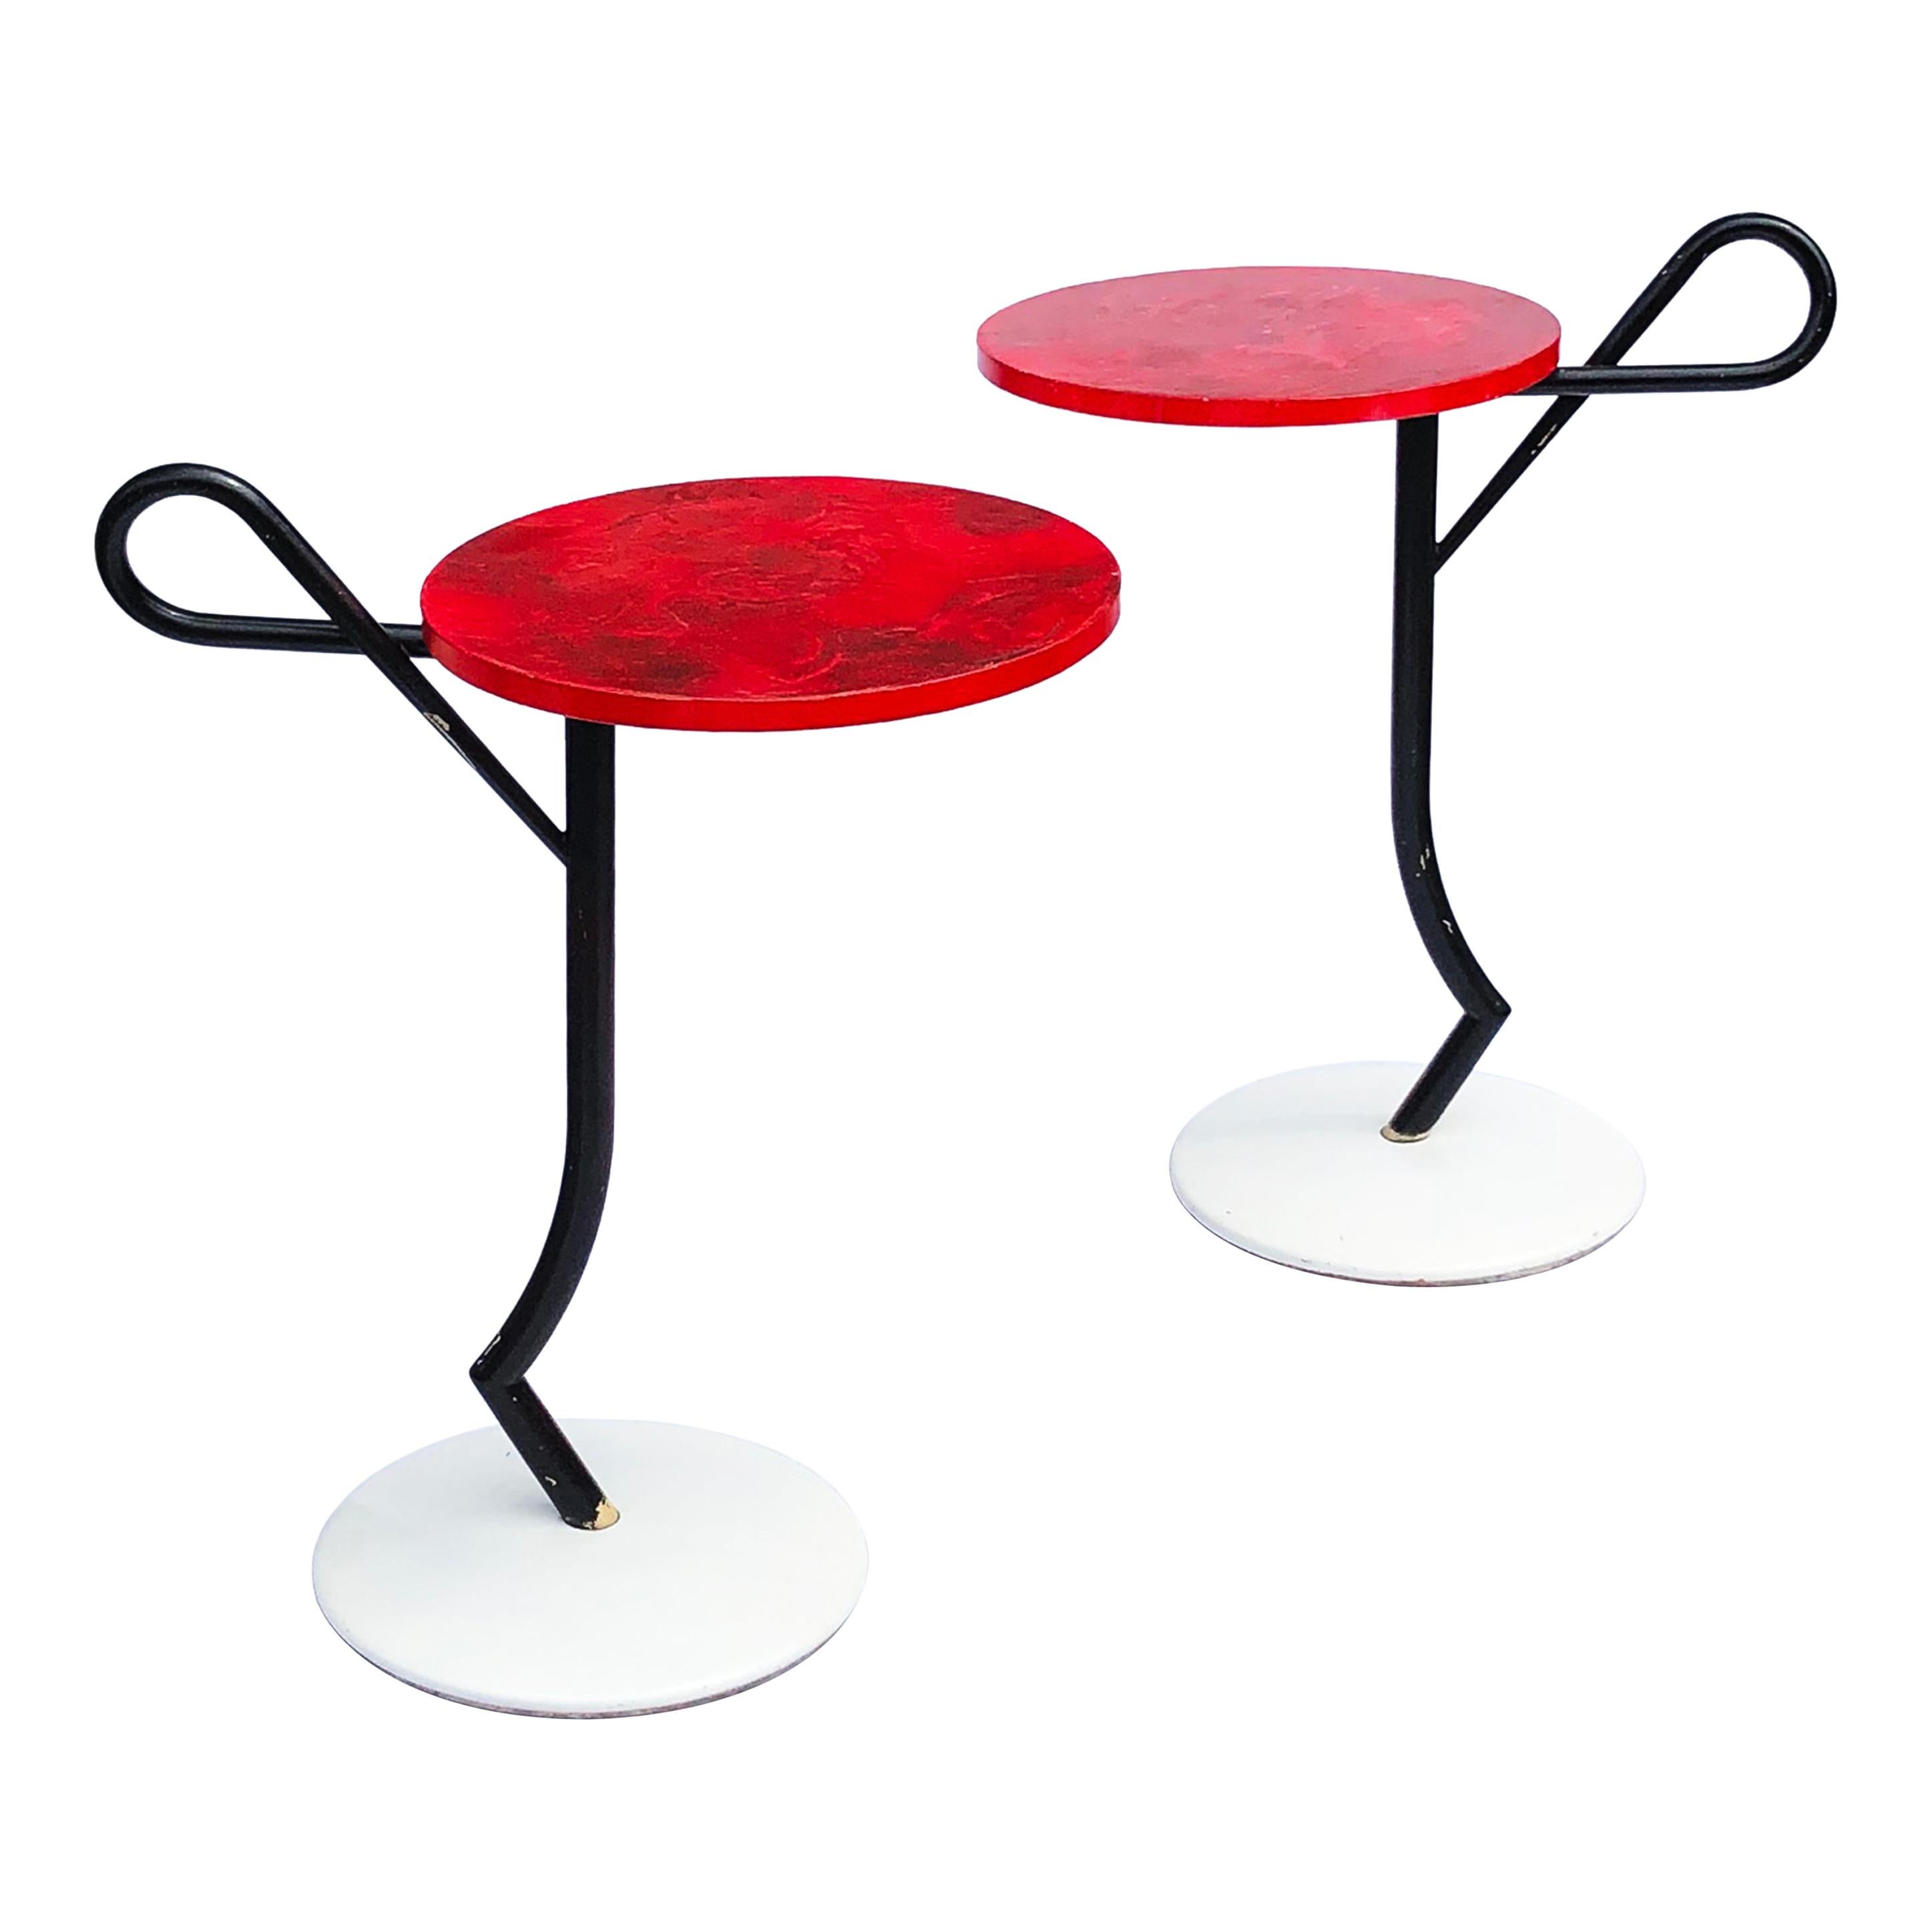 1980s Memphis Milano Design Style Tall Side Tables Sottsass Period Modernist For Sale